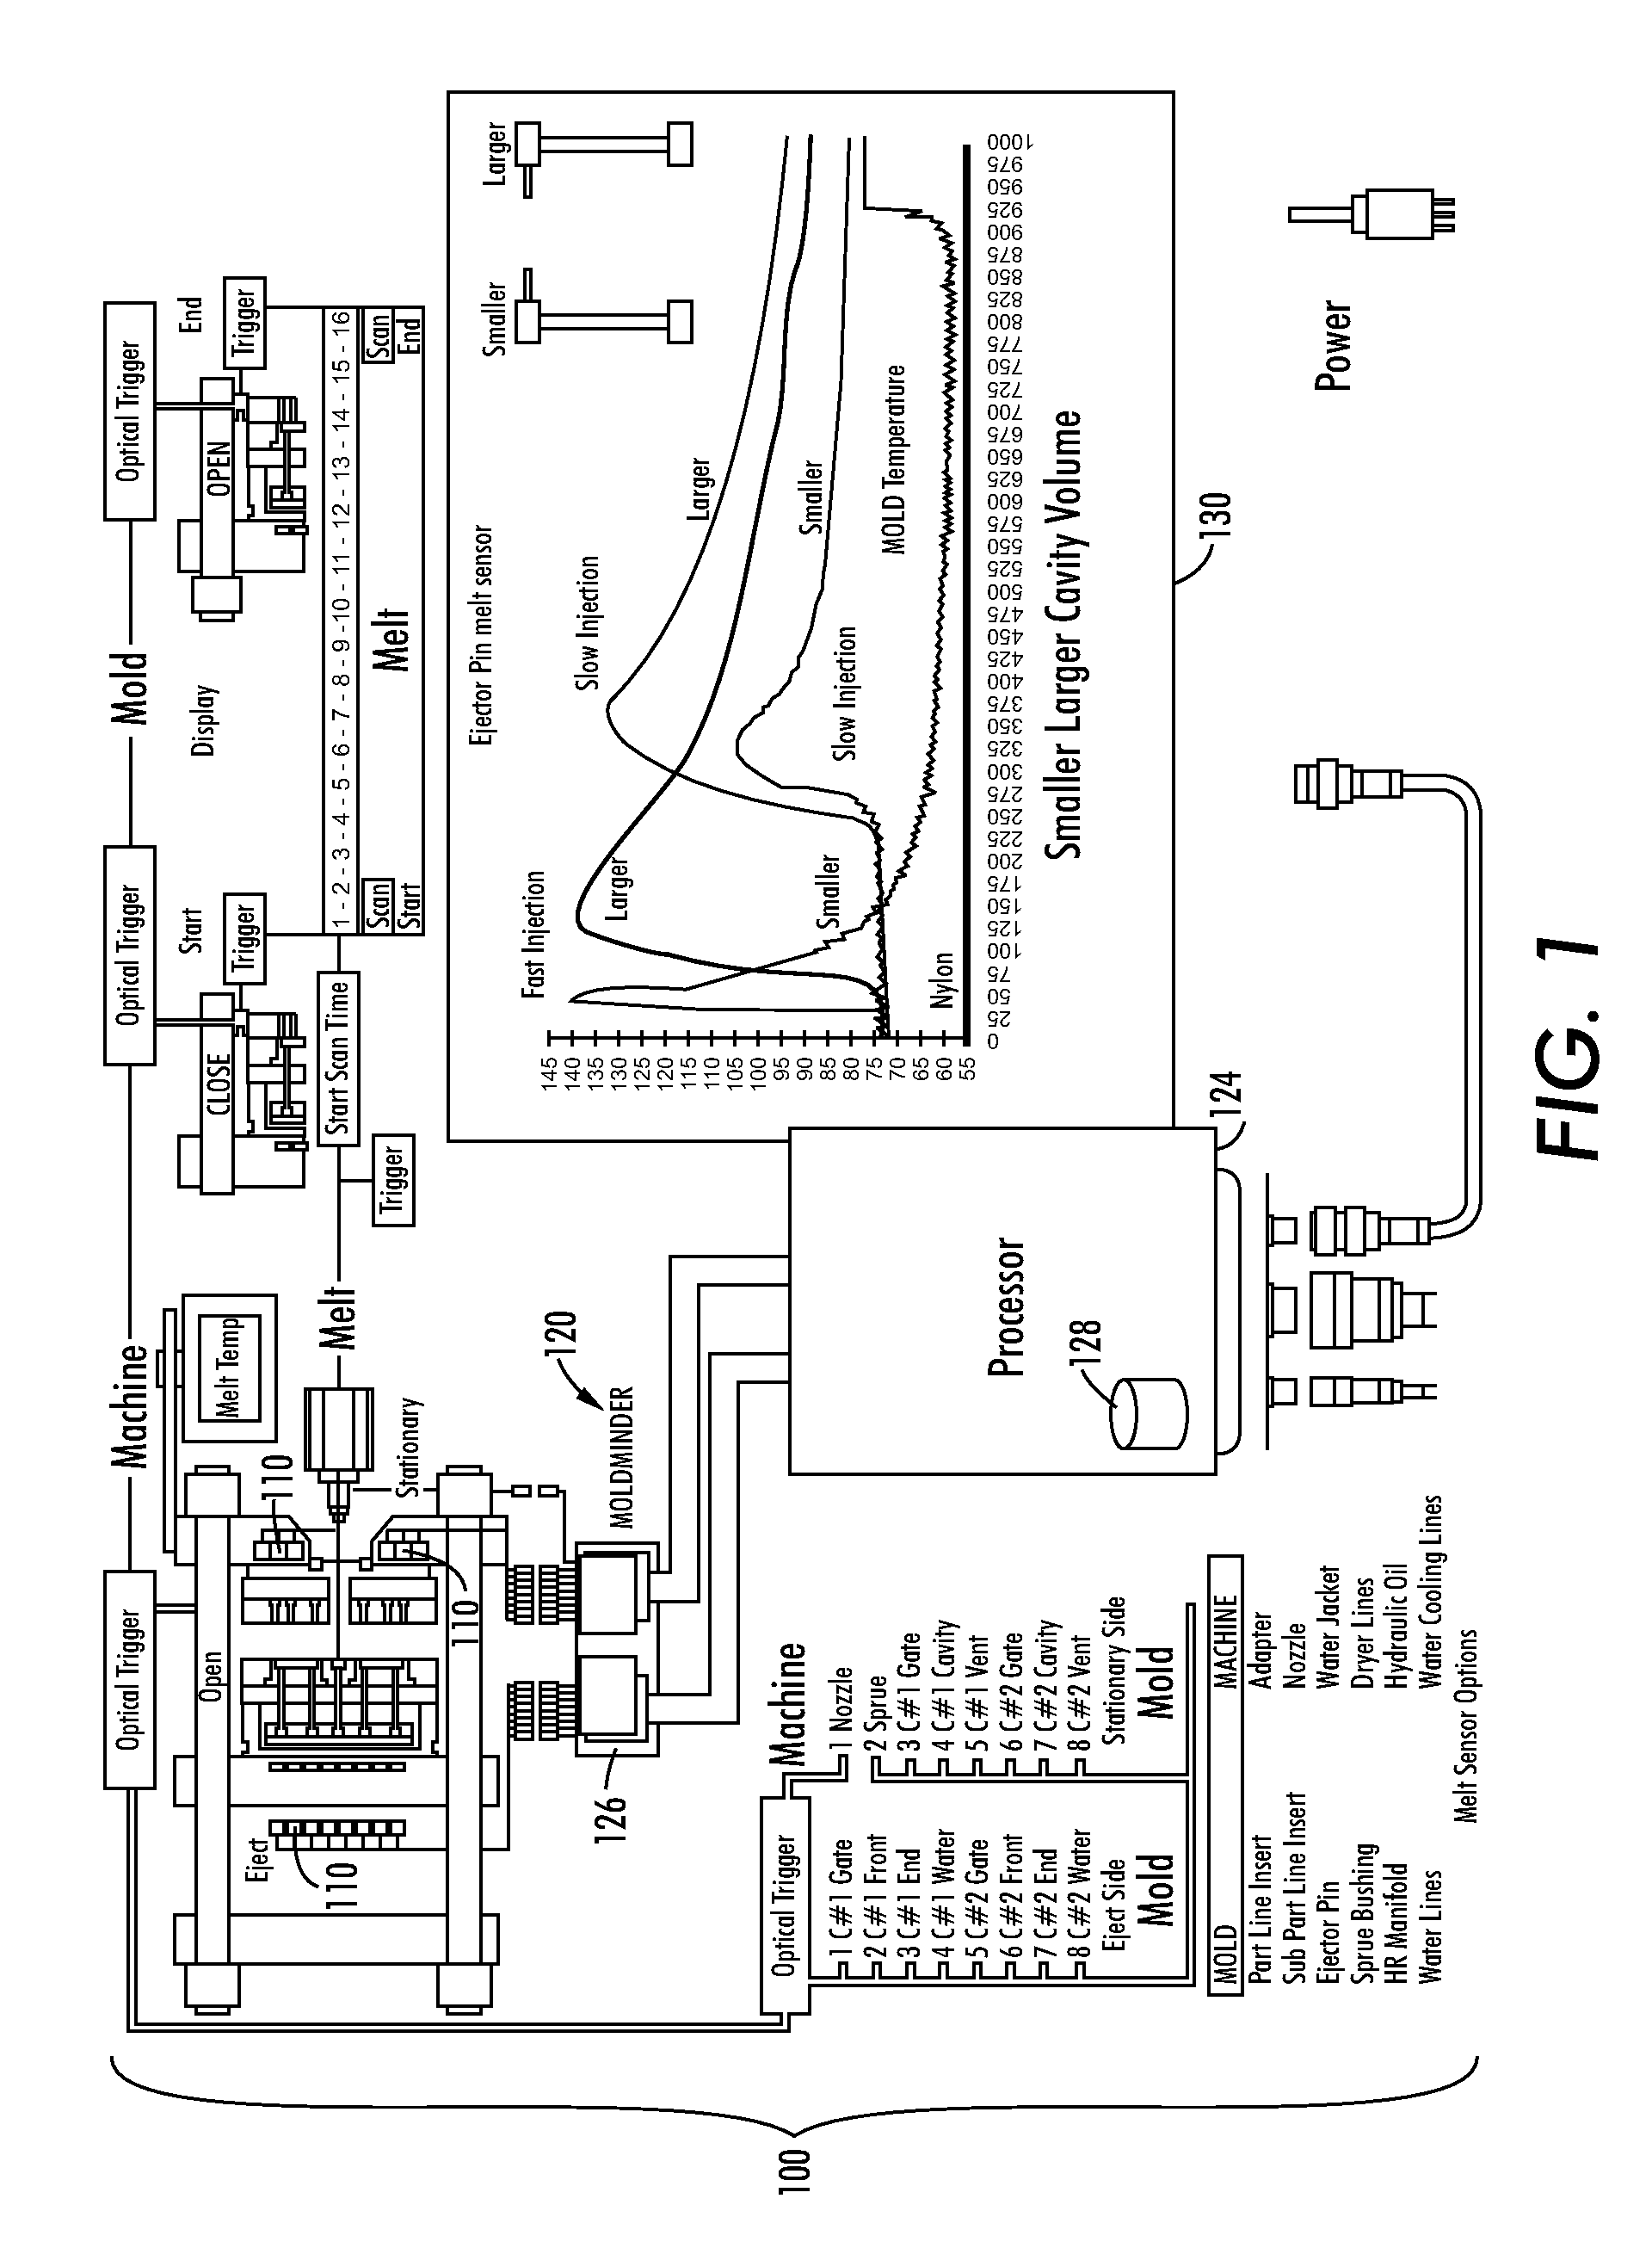 System for monitoring temperature and pressure during a molding process